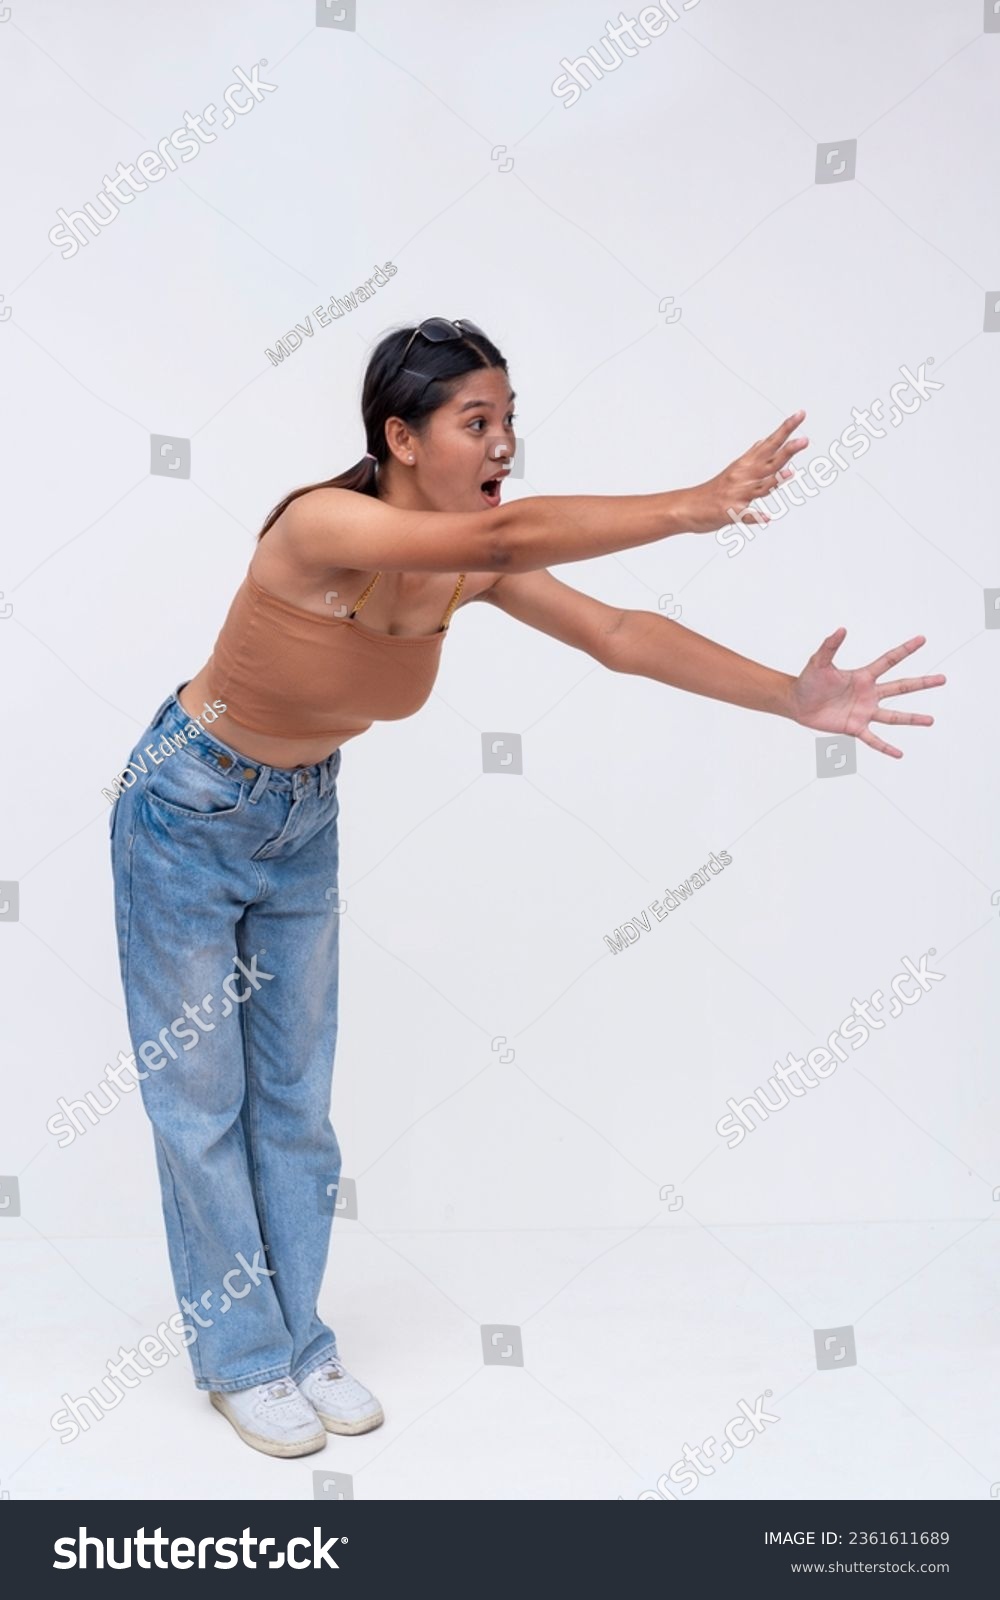 A young asian woman reaching out with her hands, with an excited or desperate look on her face. Isolated on a white background. #2361611689